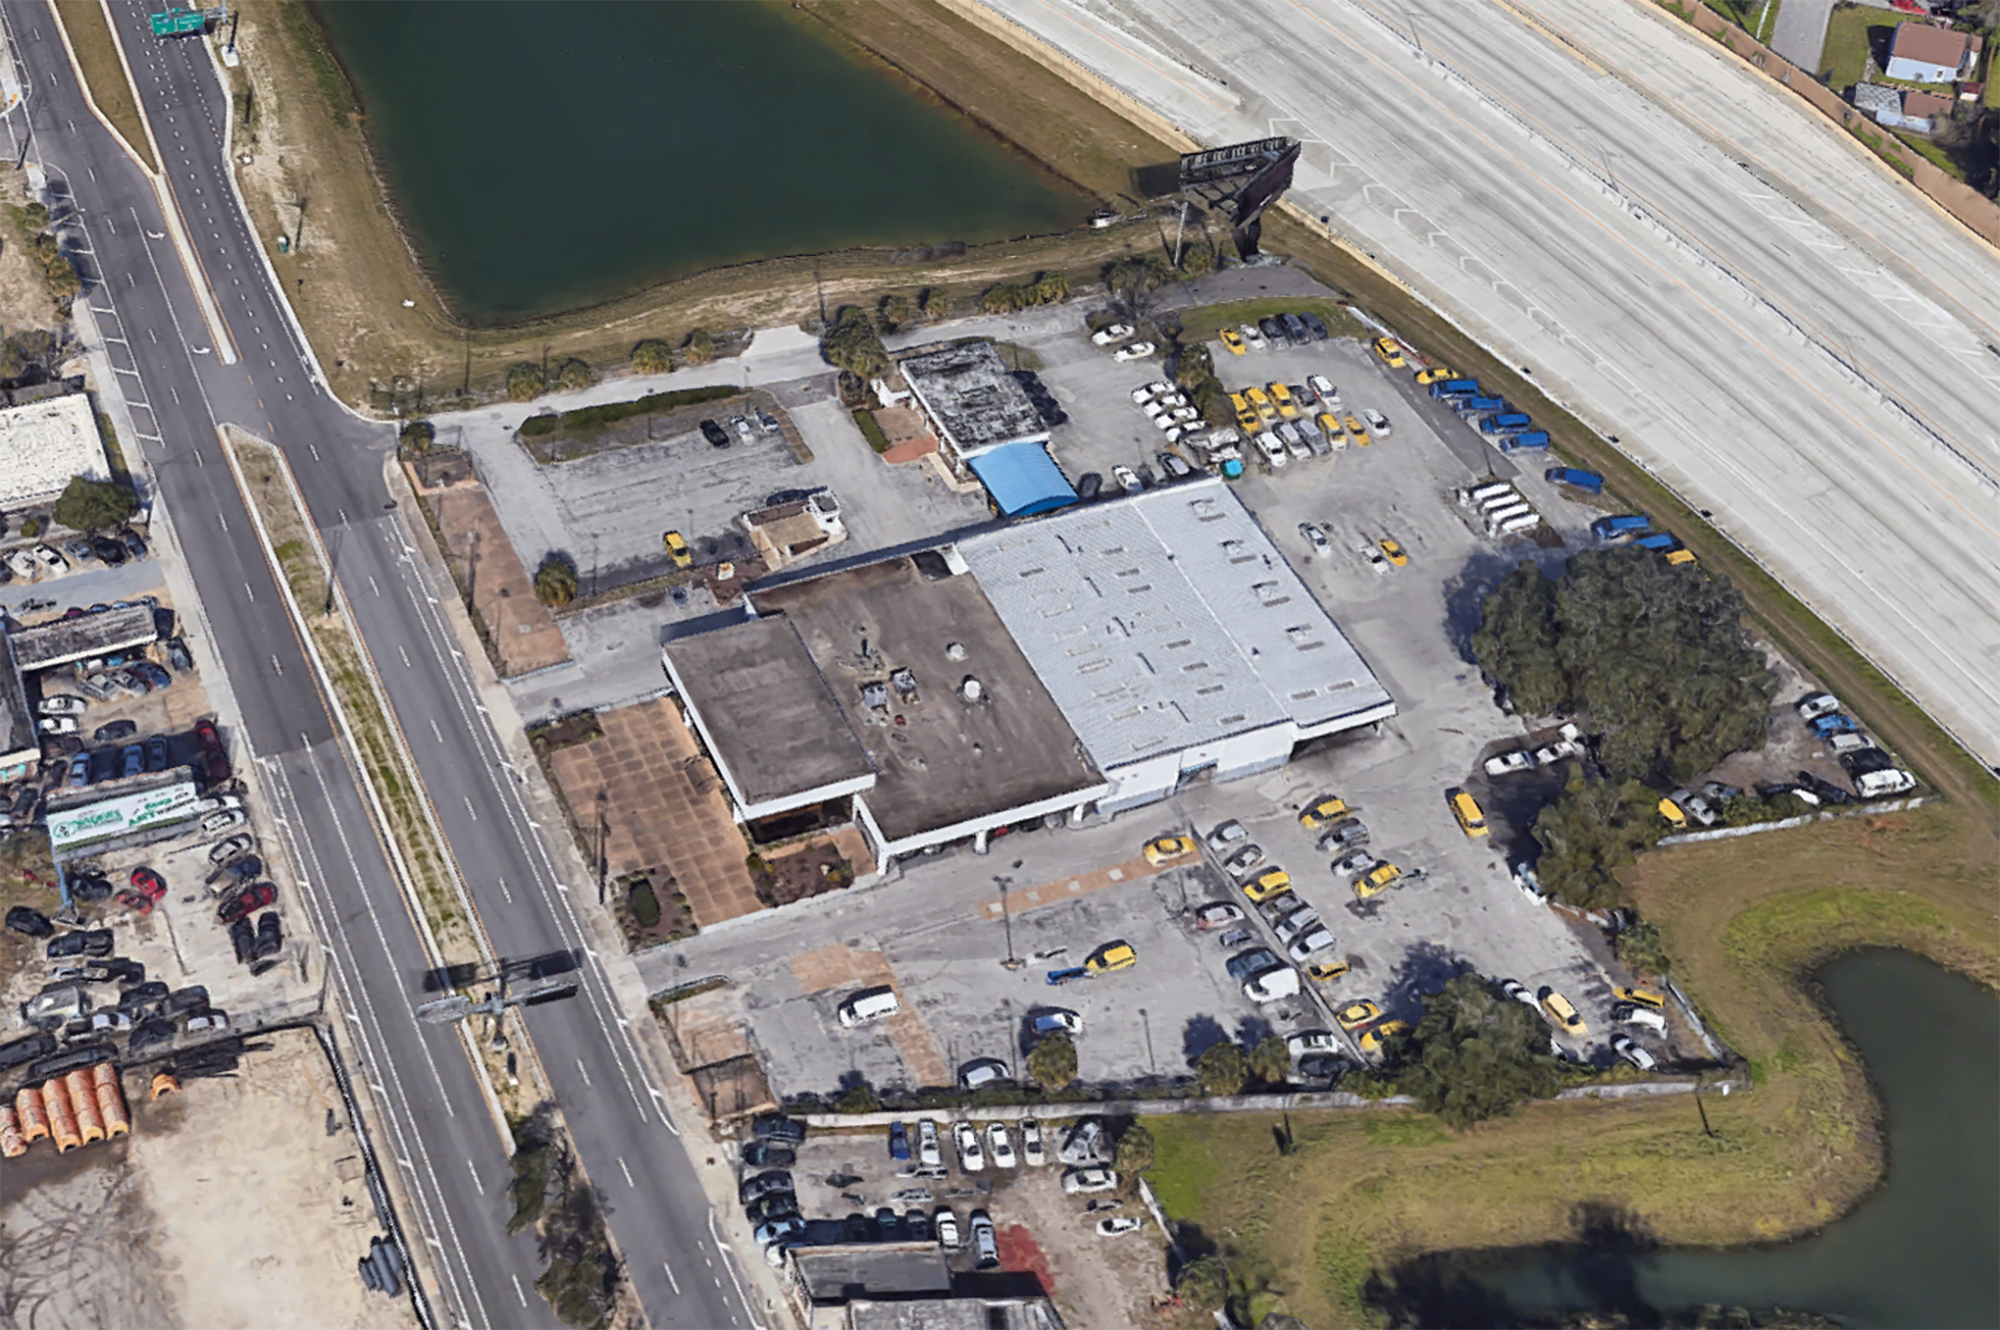 The property at 2525 Philips Highway is adjacent to Interstate 95 just south of San Marco. (Google)